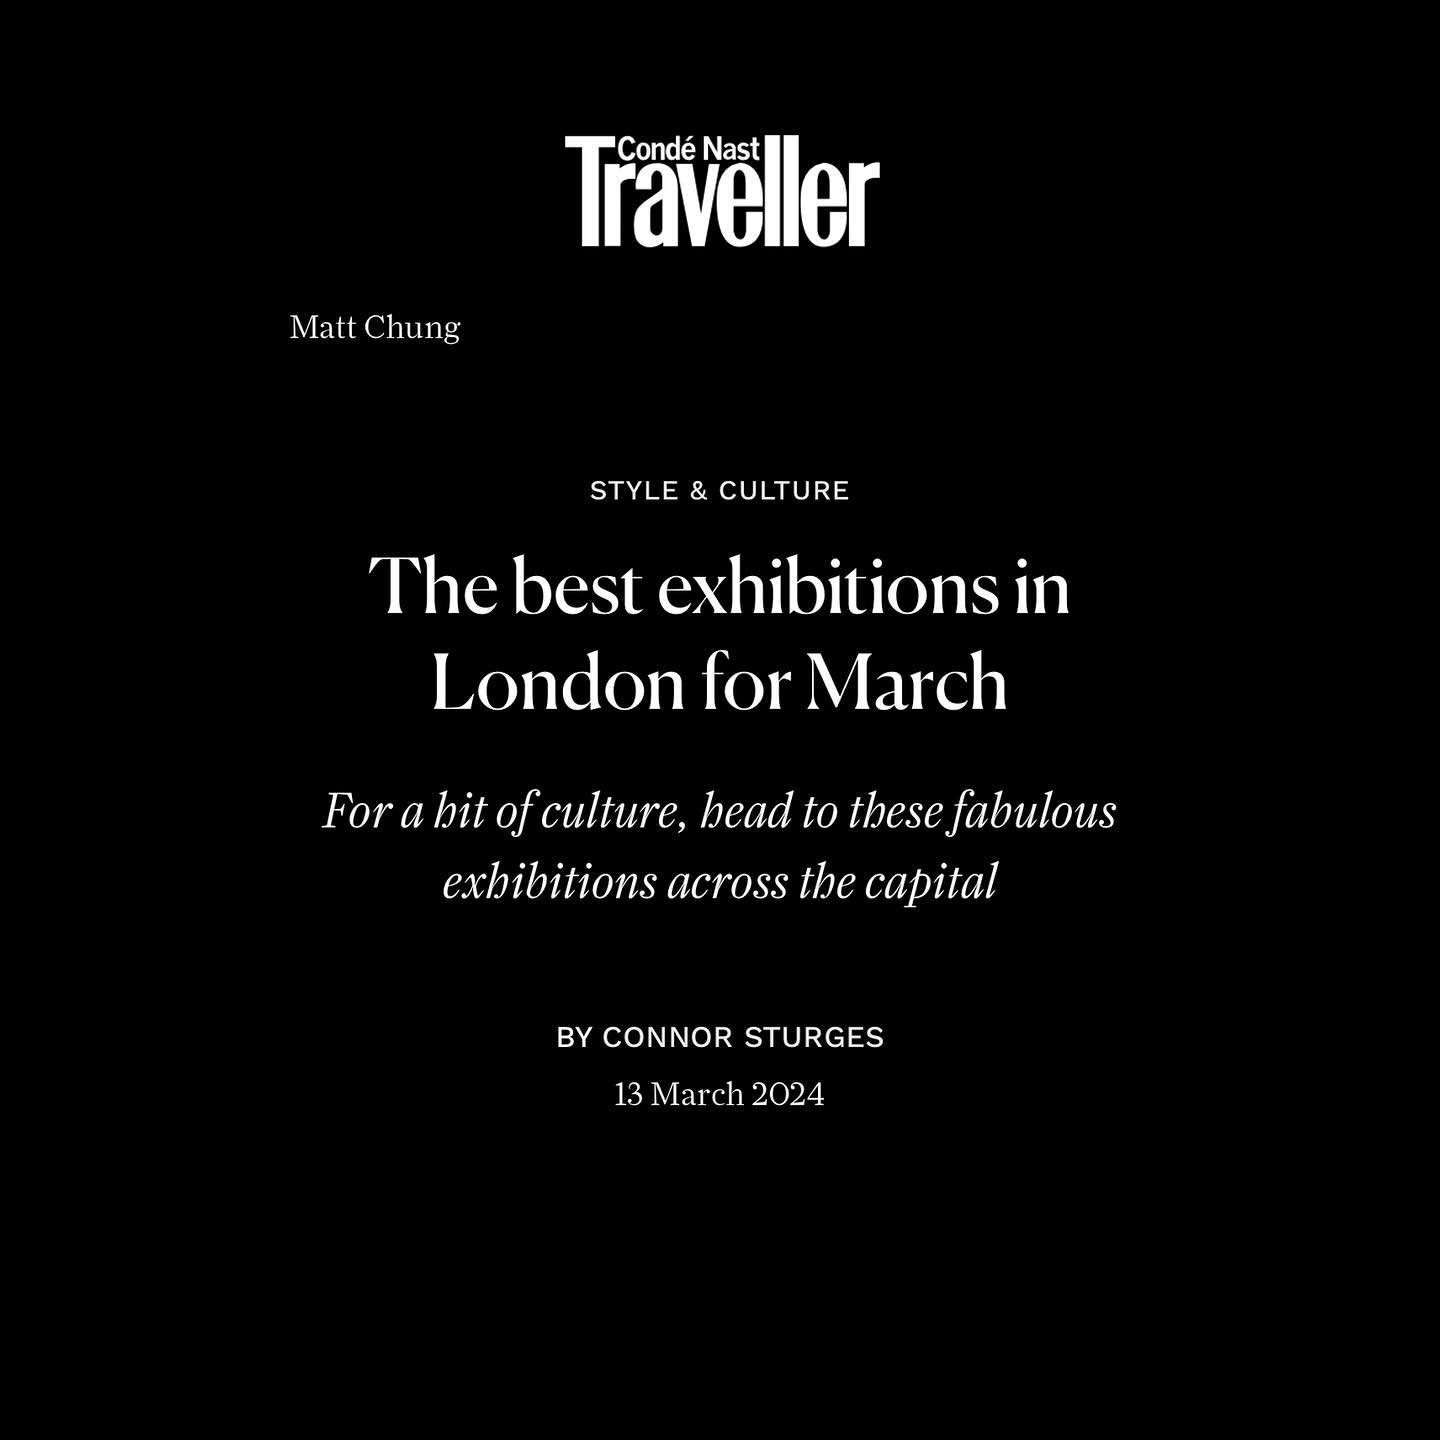 Number 6 on the @condenasttraveller list of 10 BEAT EXHIBITIONS IN LONDON FOR MARCH written by @cocosturge 

HER is a group exhibition featuring @sophieteaart | @carolinechinakwe | @beryl_cook_official | @imogenhoganstudio 

Free to visit at @melondo